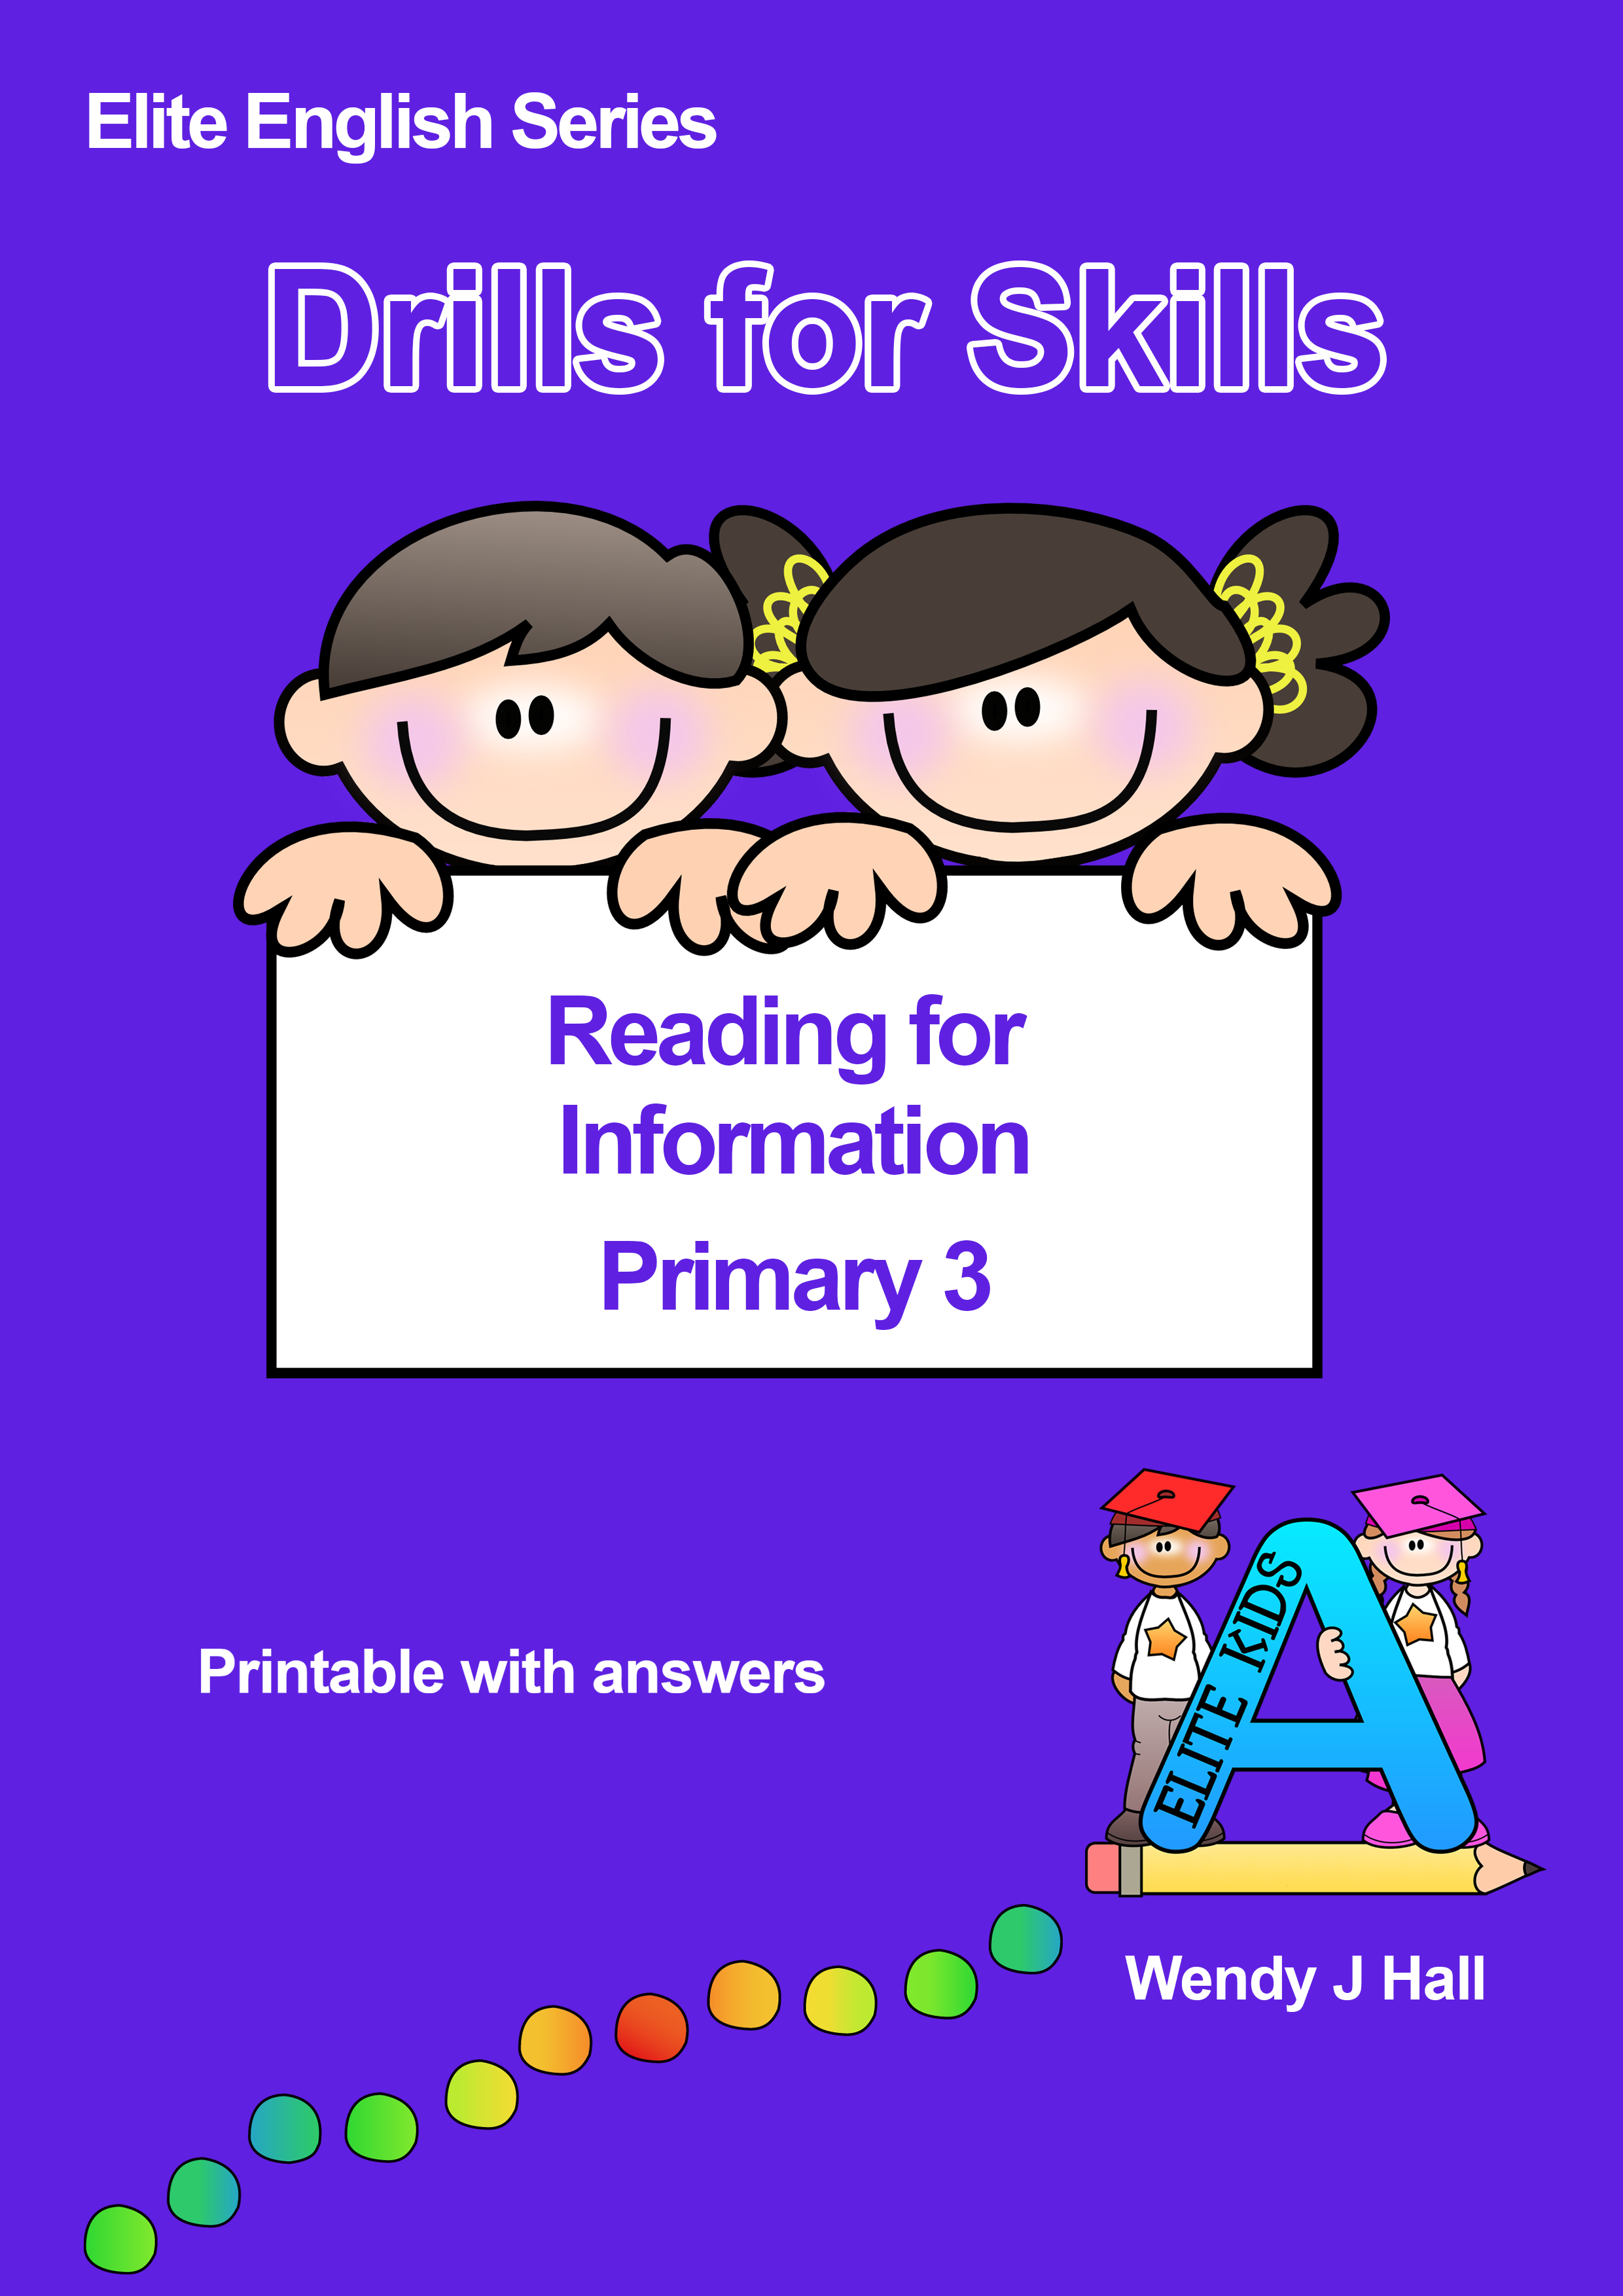 Drills for Skills - Reading for Information | Primary 3